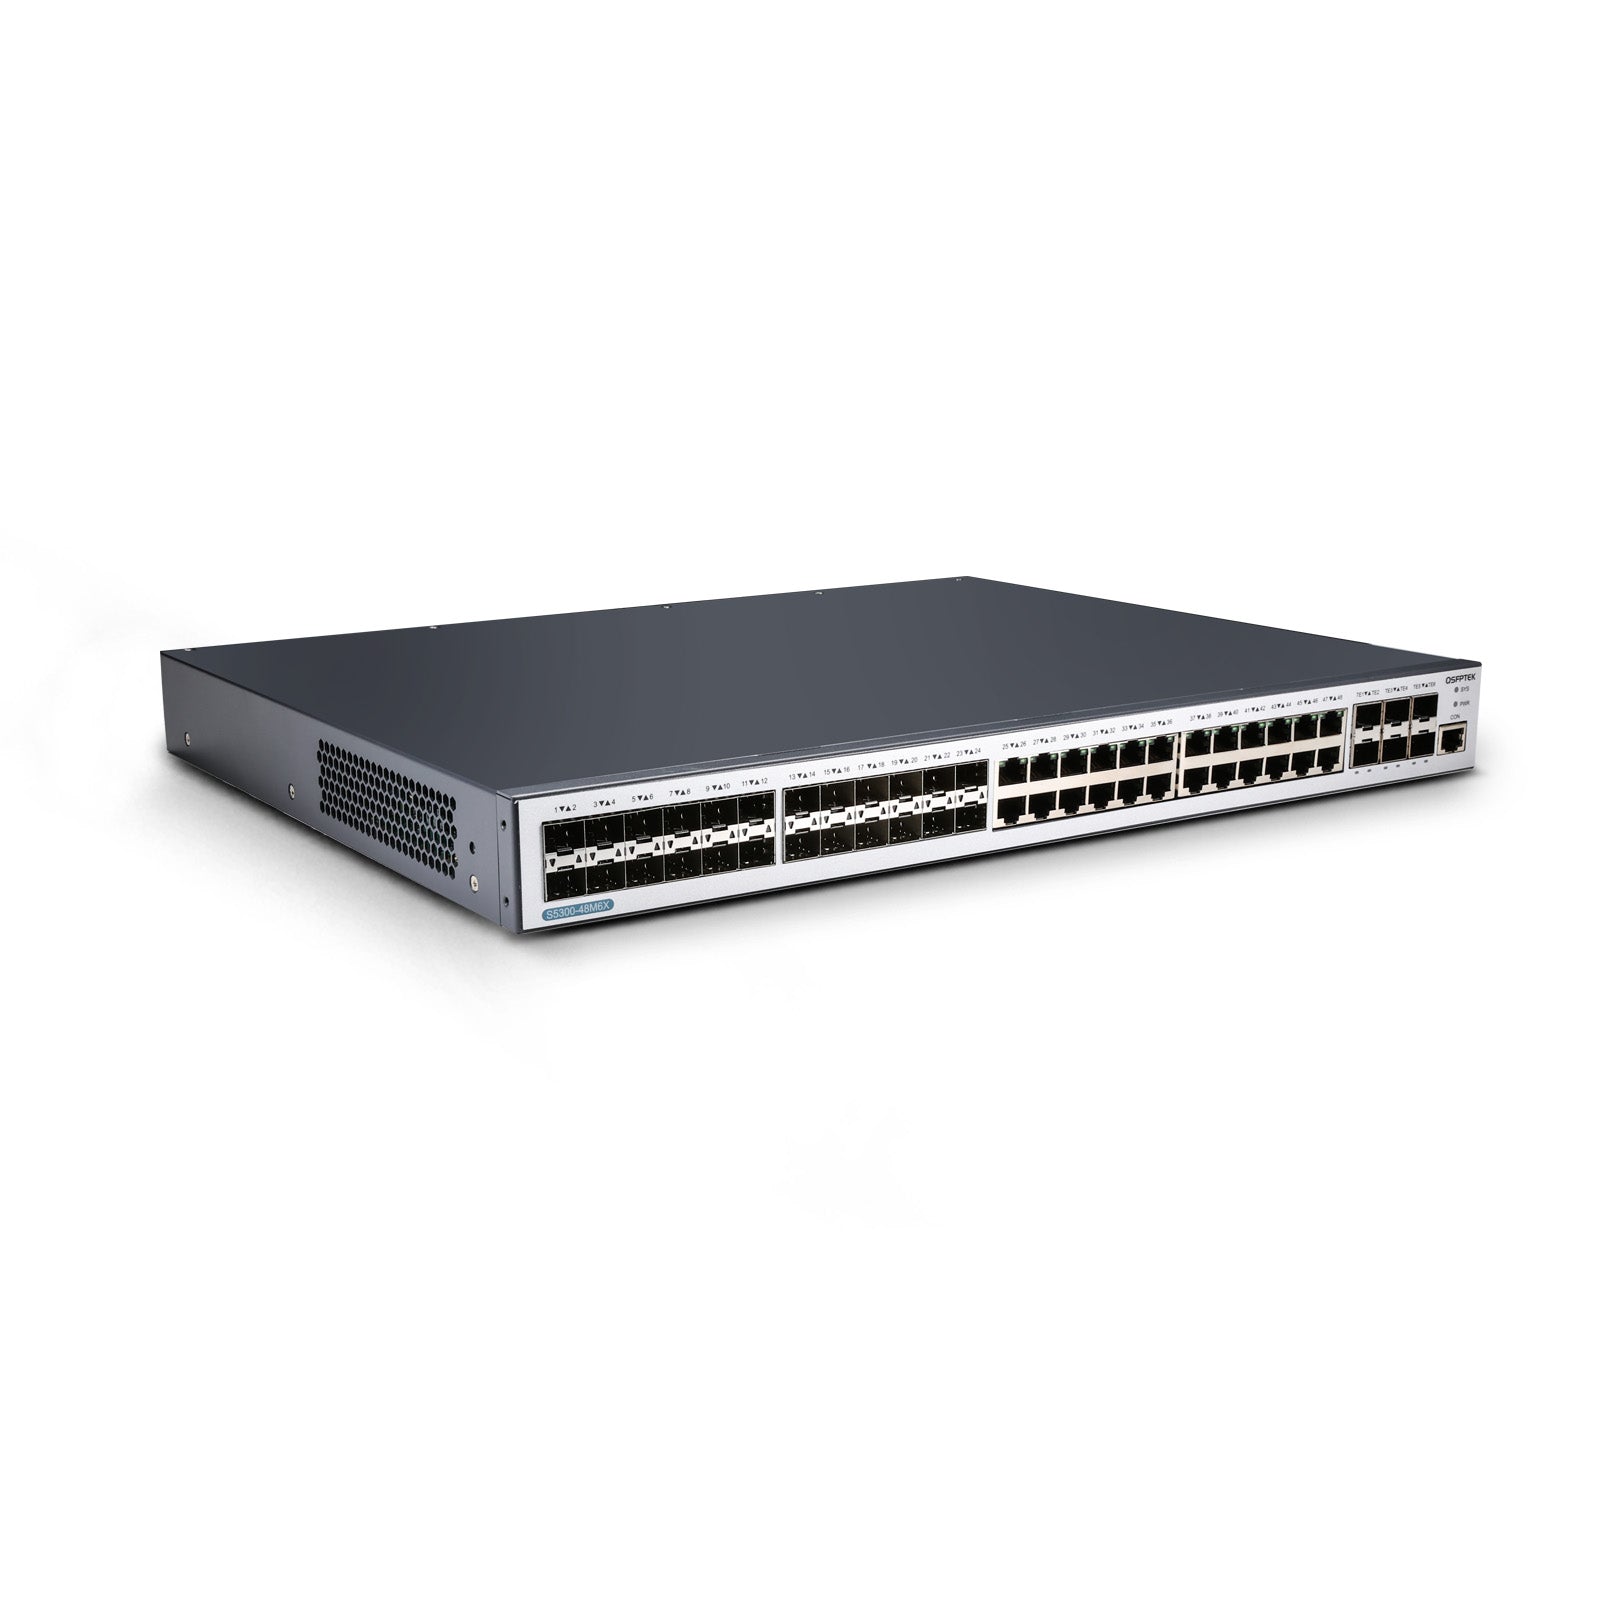 S5300-48M6X, 48-Port Ethernet L3 Switch, 24x GE RJ45 Ports, 24x GE SFP Ports with 6x 10GE SFP+ Uplink, Stackable Switch